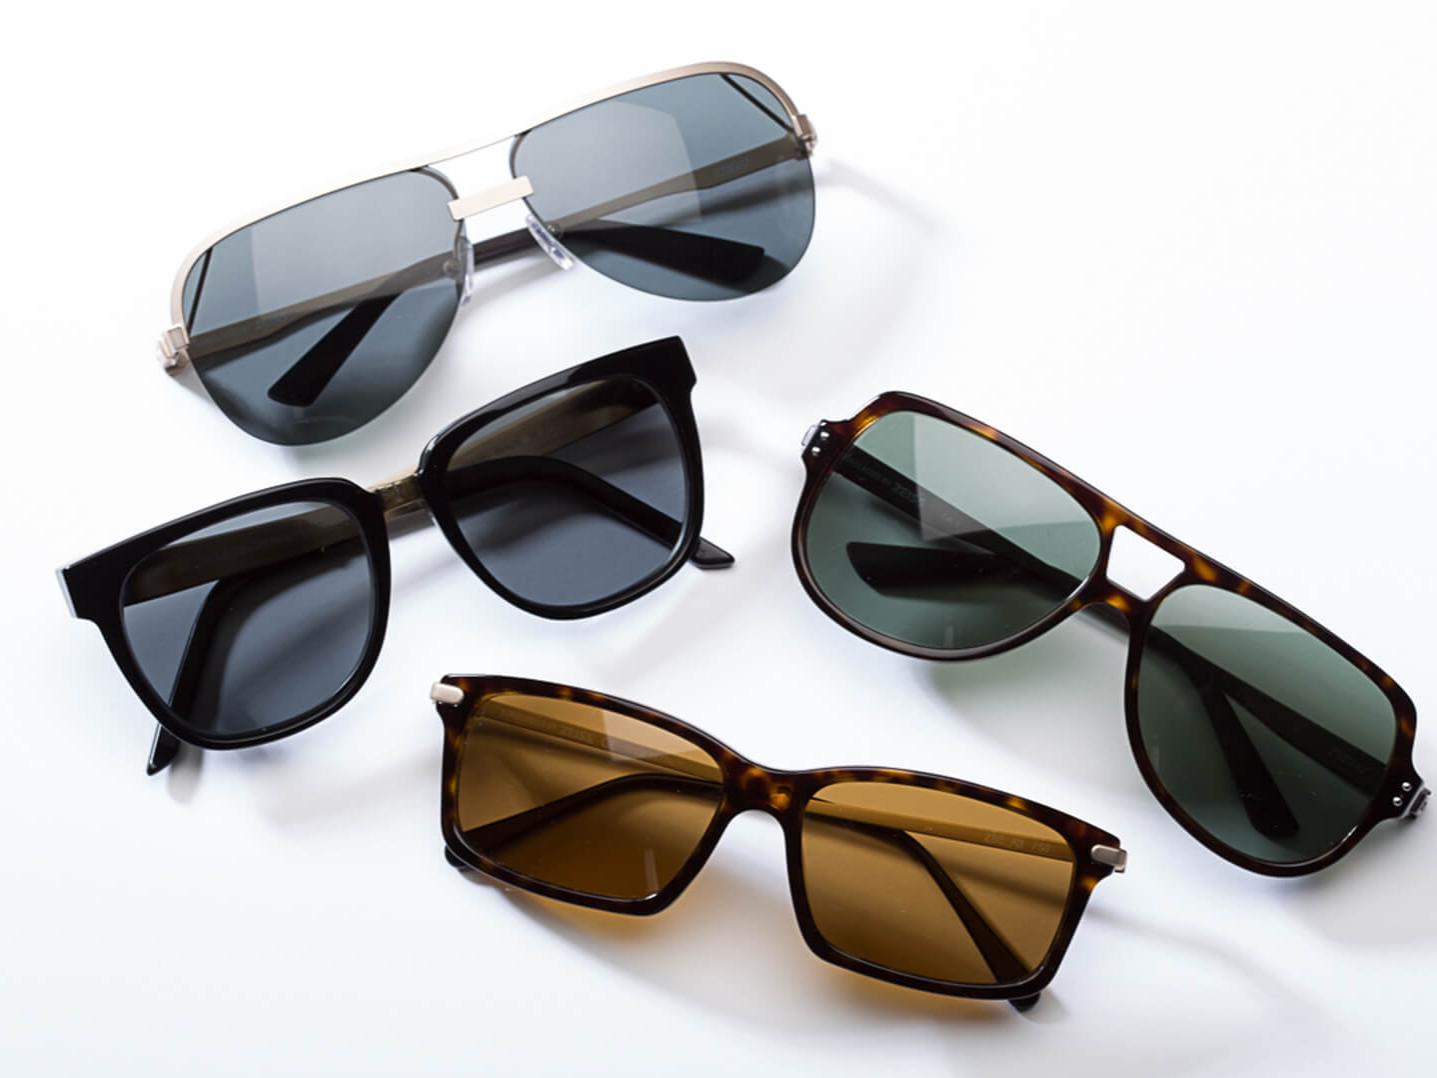 Polarised lenses are available in almost any colour you can think of, but speak to your eye care practitioner about what you intend to use your tinted glasses for before choosing a shade.